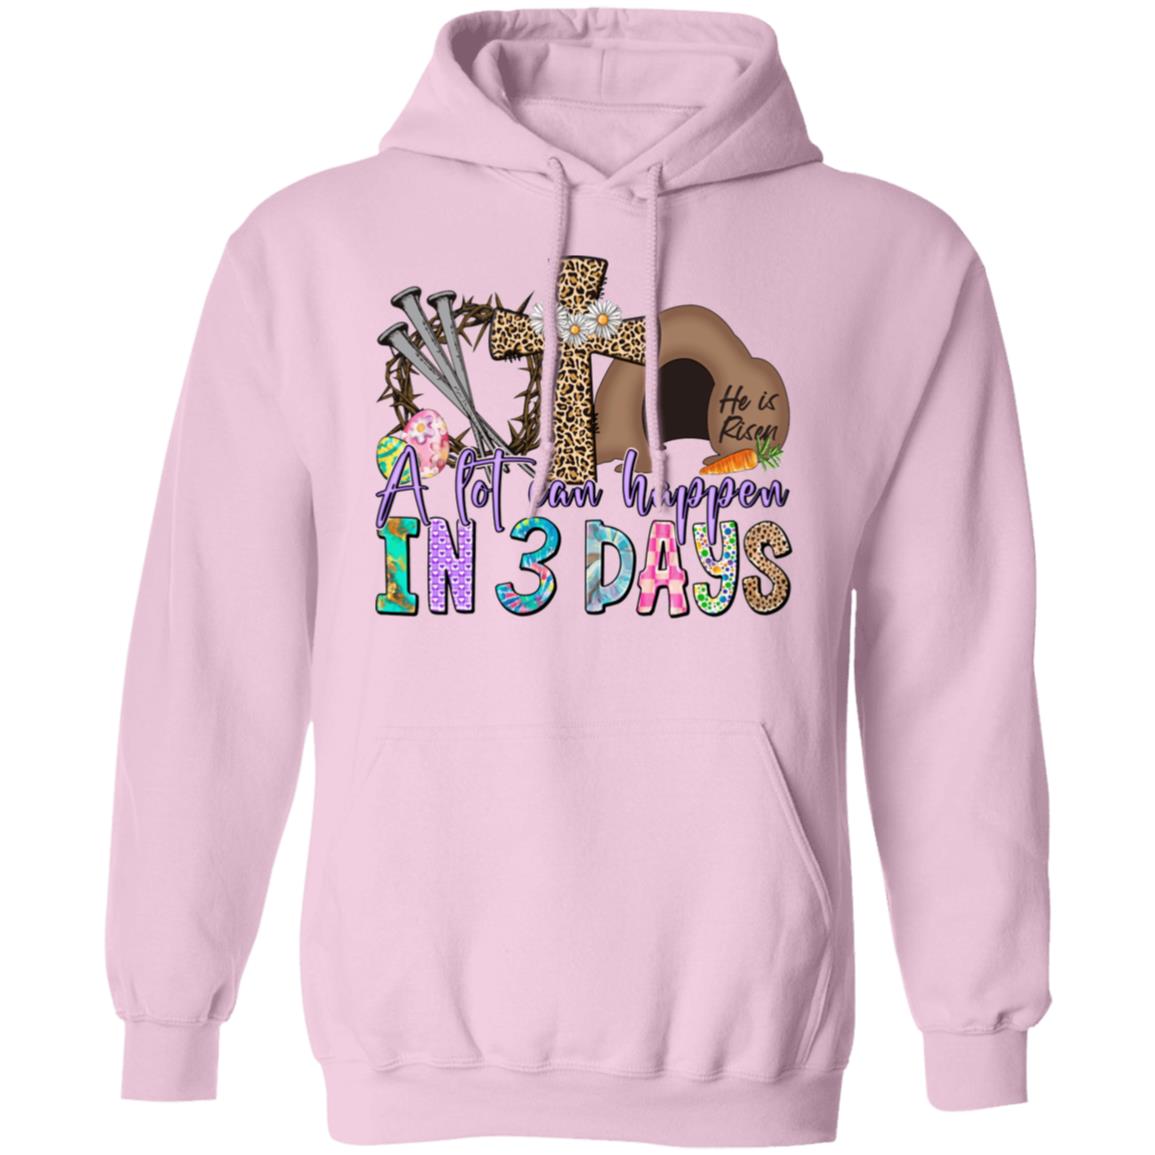 A lot Can Happen in 3 Days Easter Pullover Hoodie